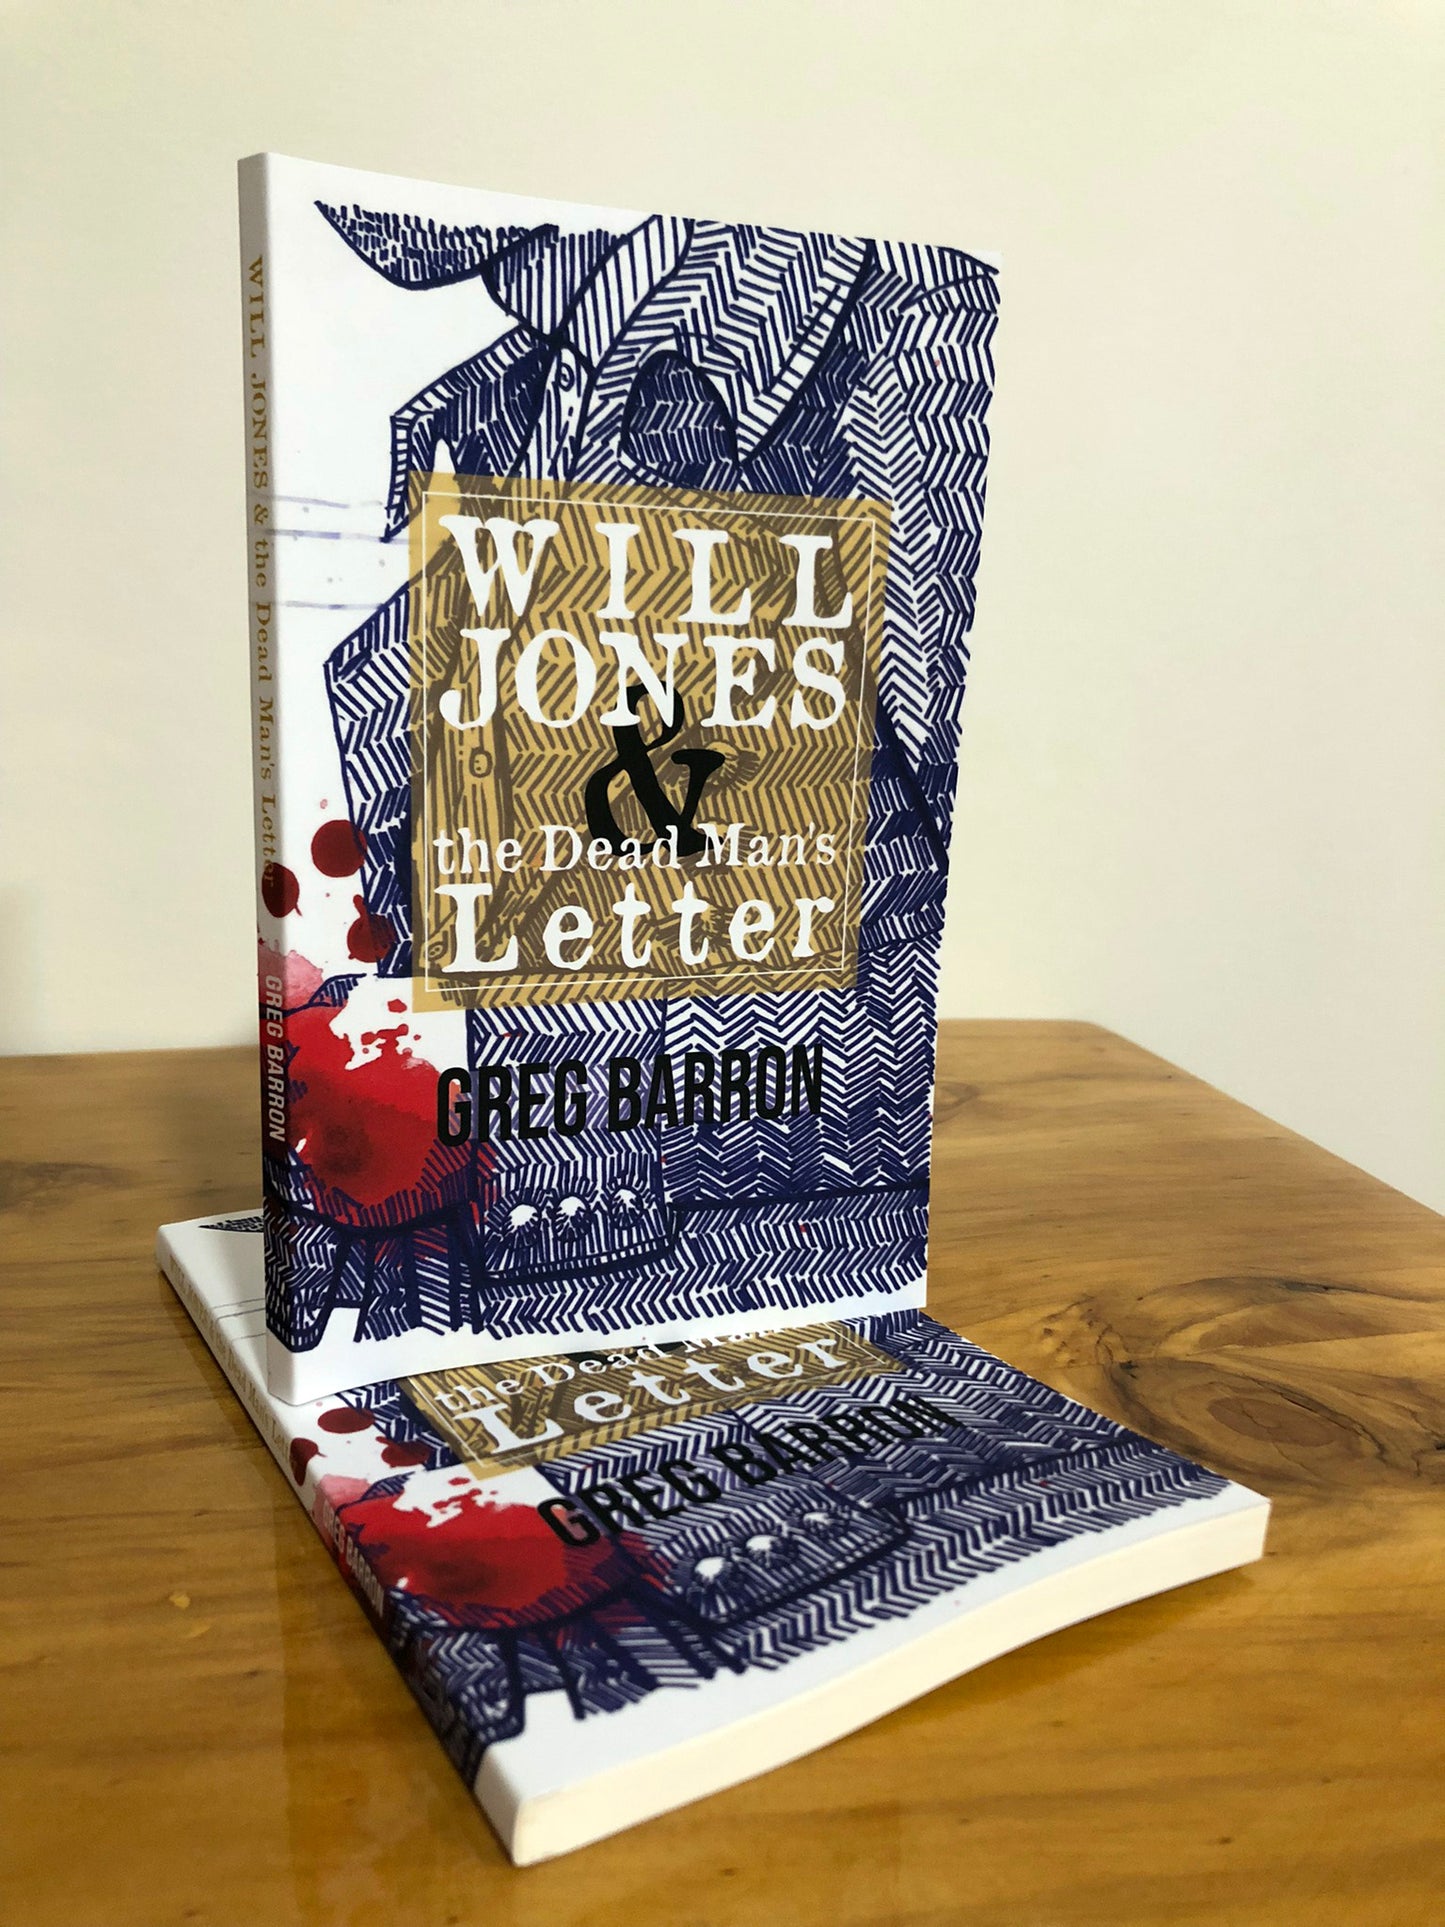 Will Jones and the Dead Man's Letter by Greg Barron